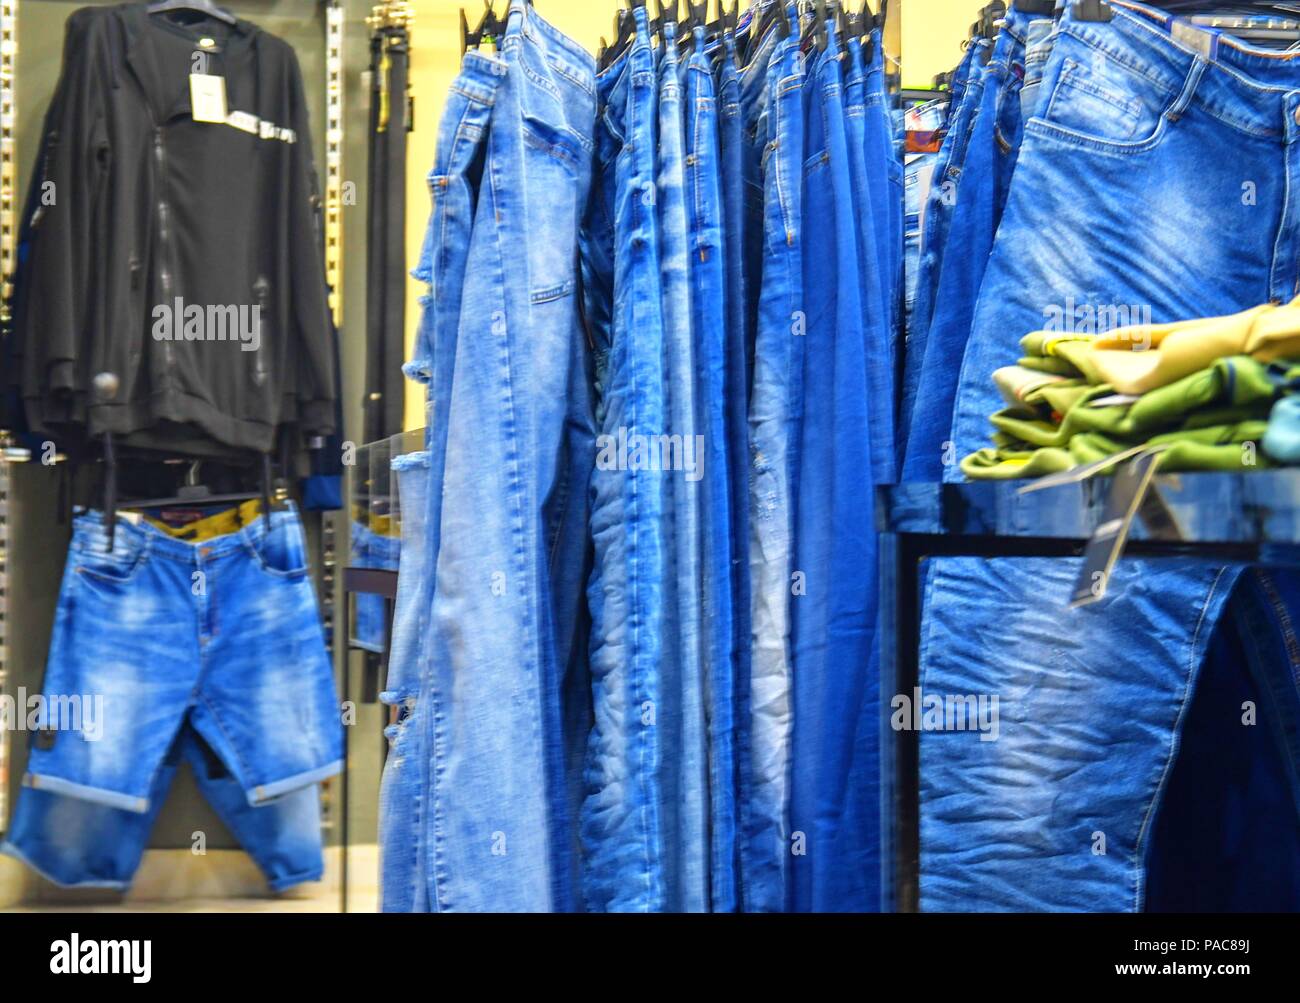 Row of hanged blue jeans in a shop. Clothes store. Shopping in fashion mall. Garments on hangers. Stock Photo